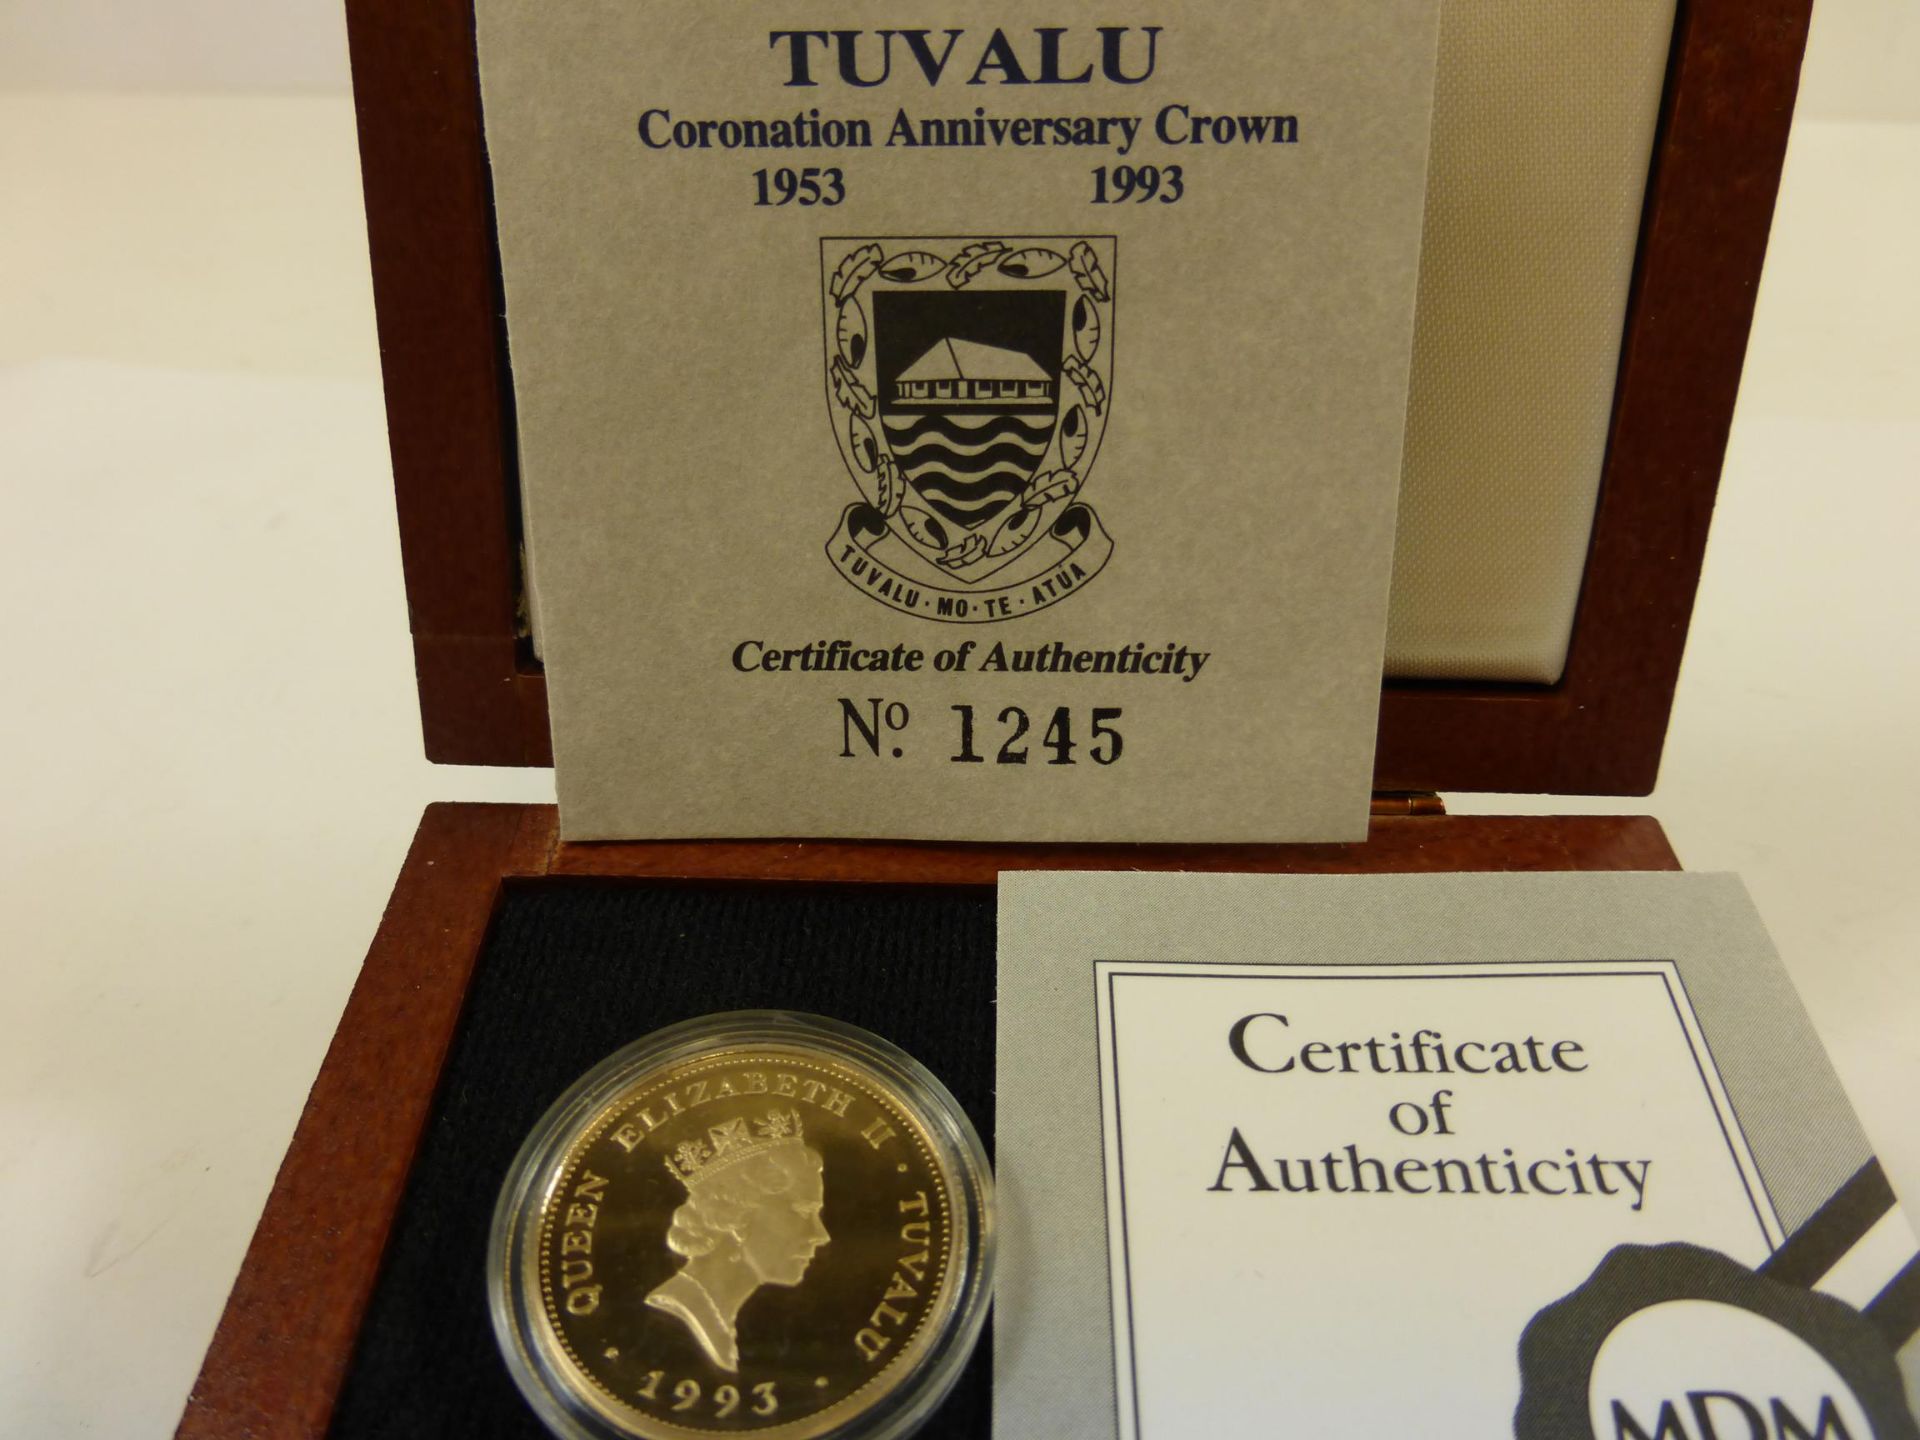 Queen Elizabeth Coronation Anniversary Approx. 14 Carat Gold Proof Tuvalu One Hundred Dollar Coin; - Image 2 of 2